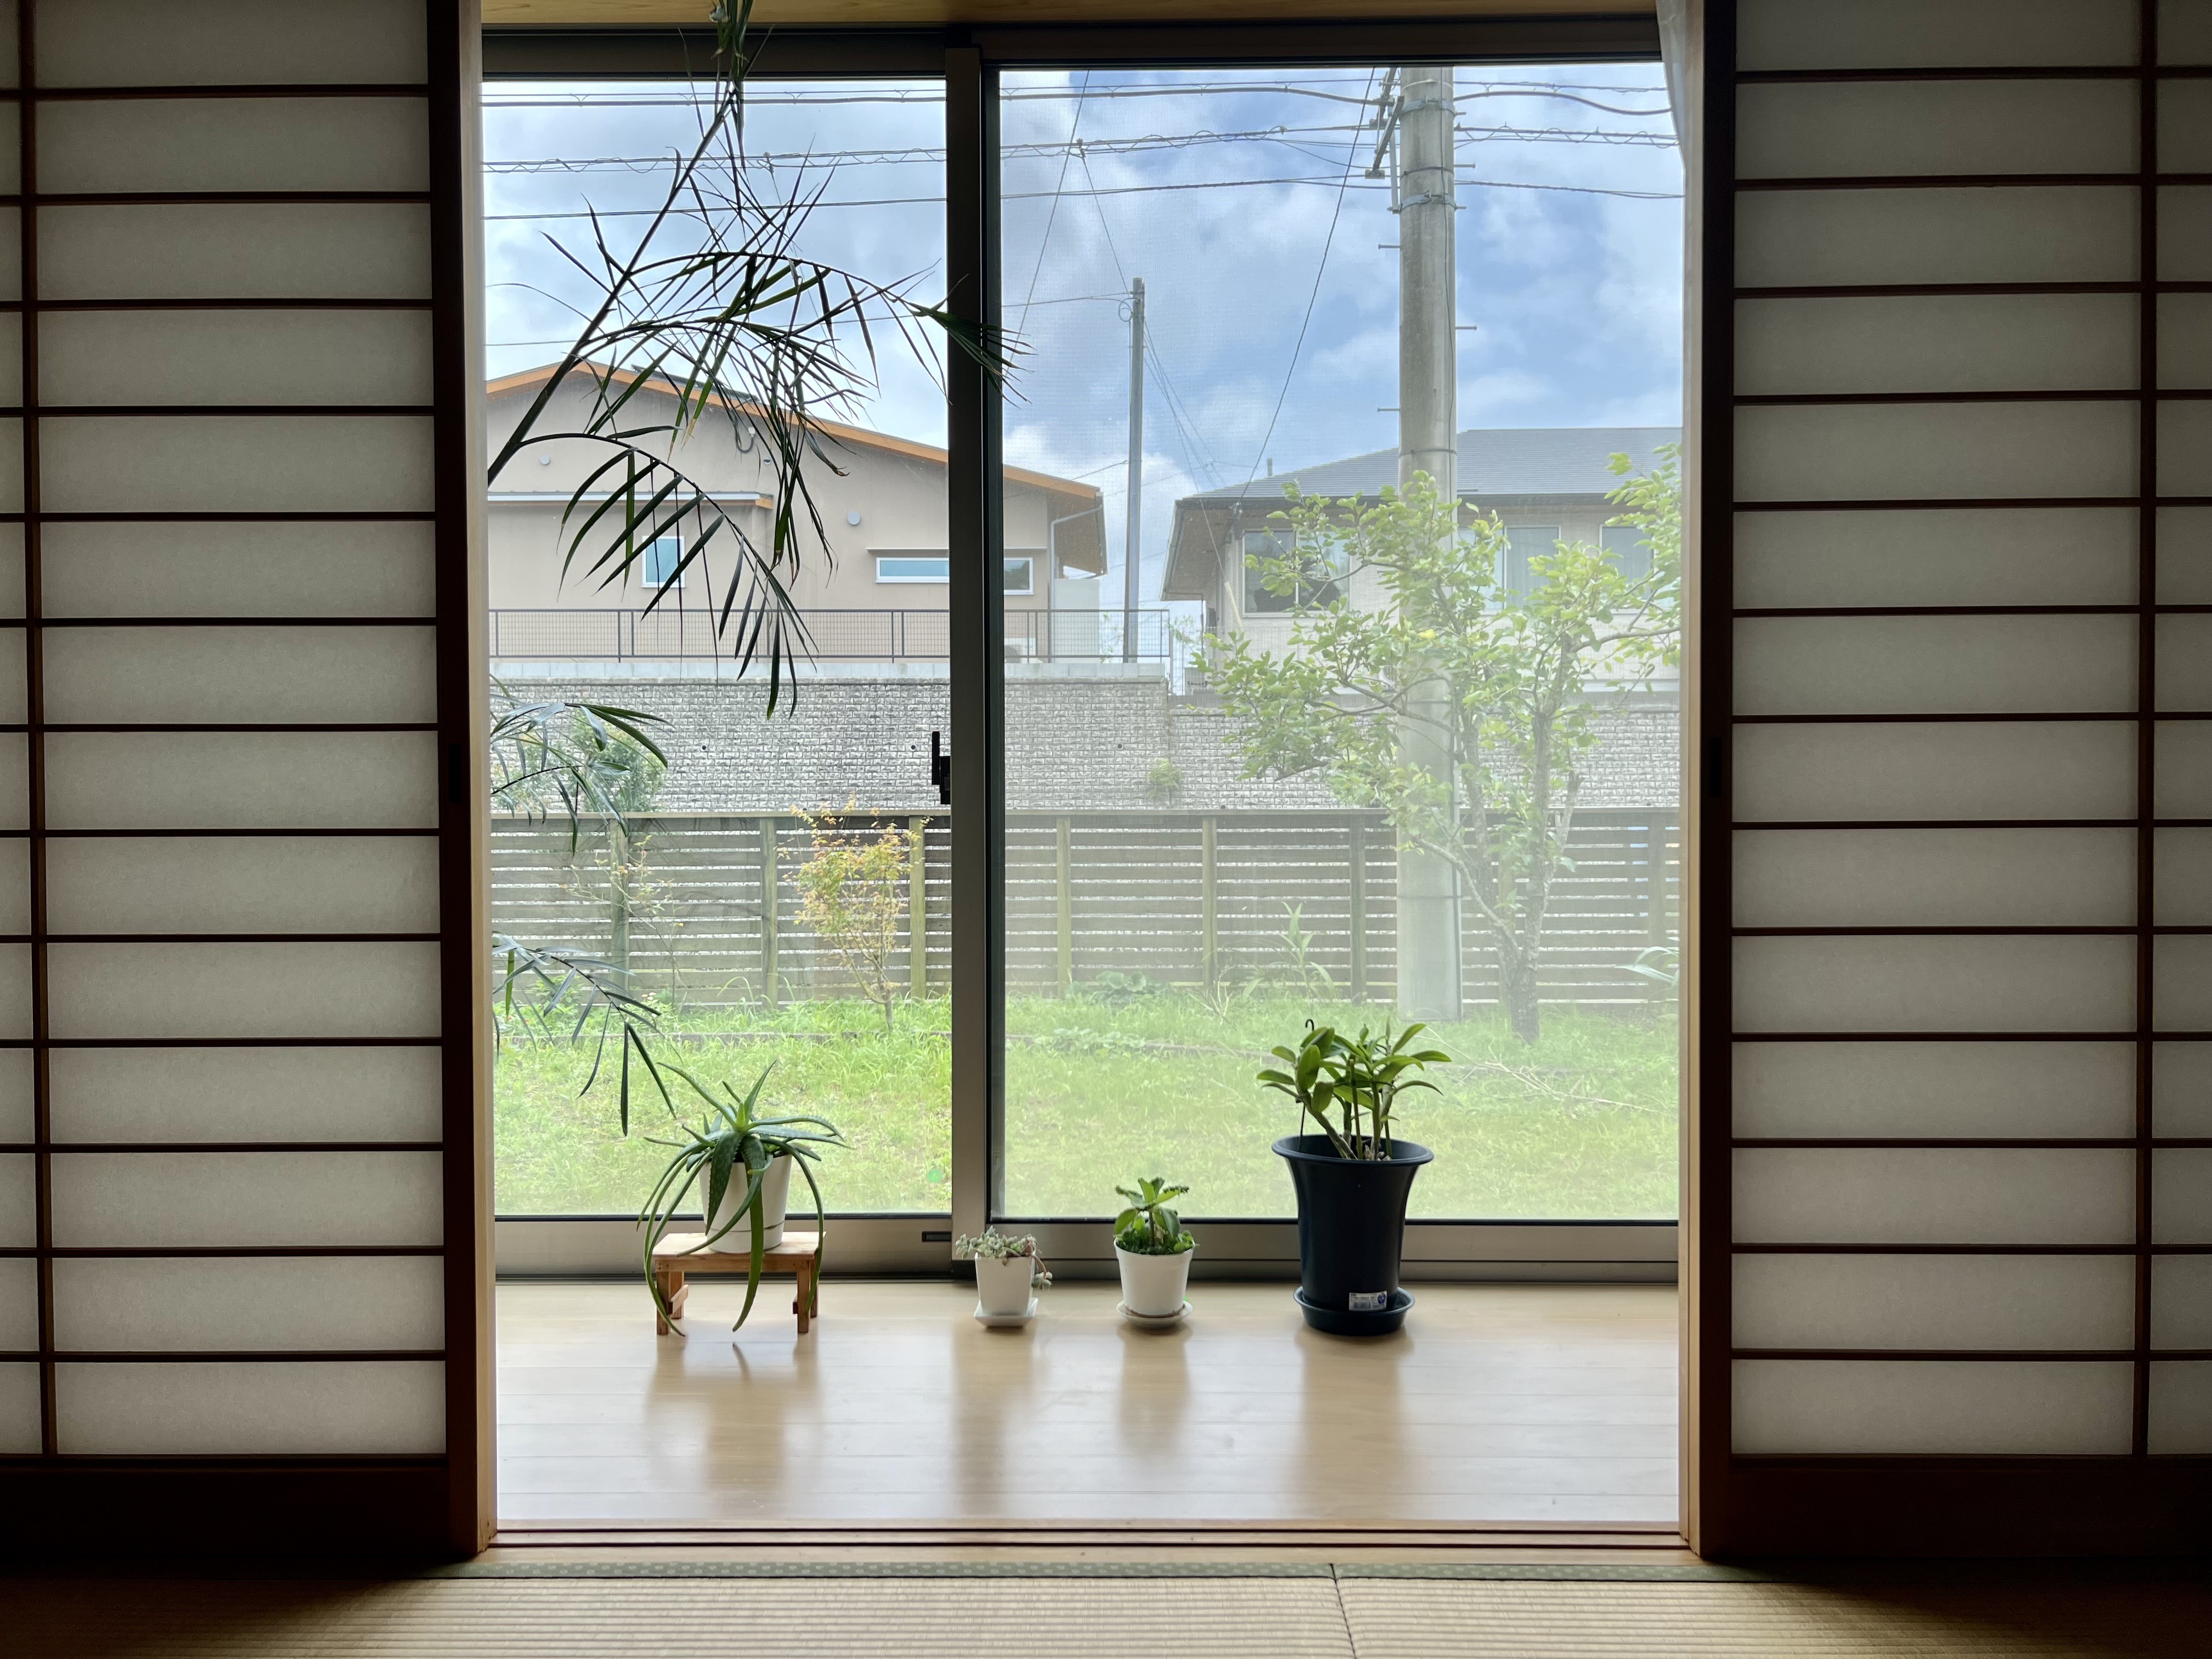 View from interior of Japanese house.